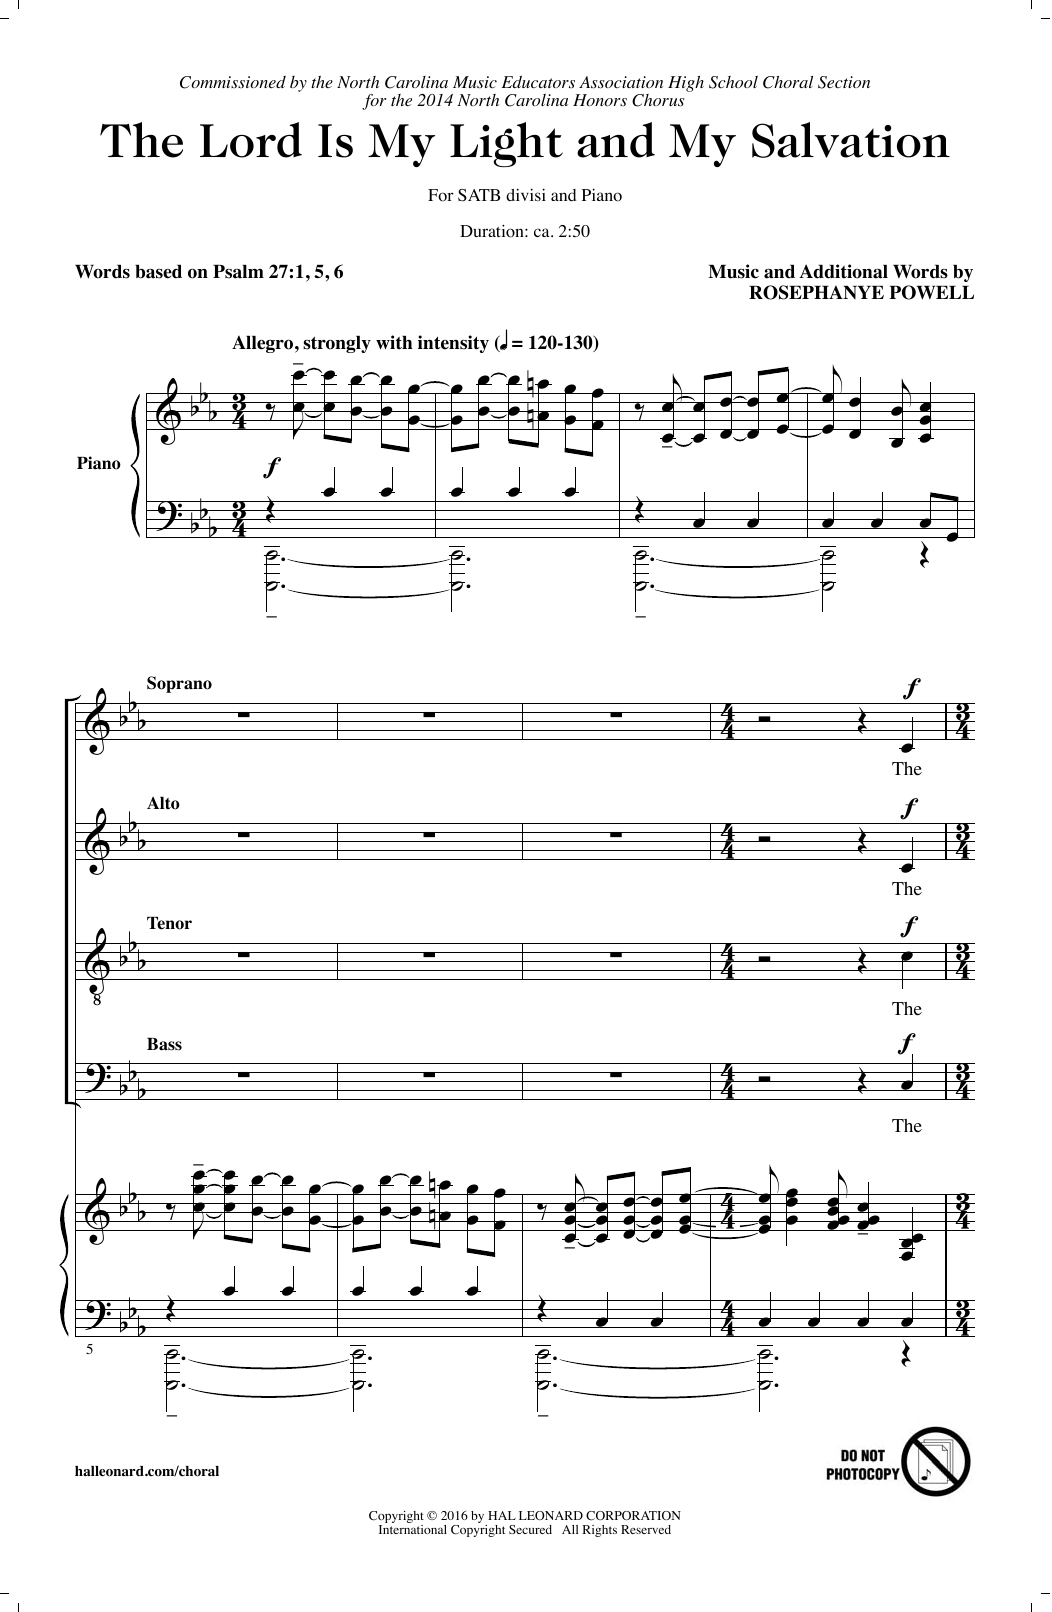 Download Rosephanye Powell The Lord Is My Light And My Salvation Sheet Music